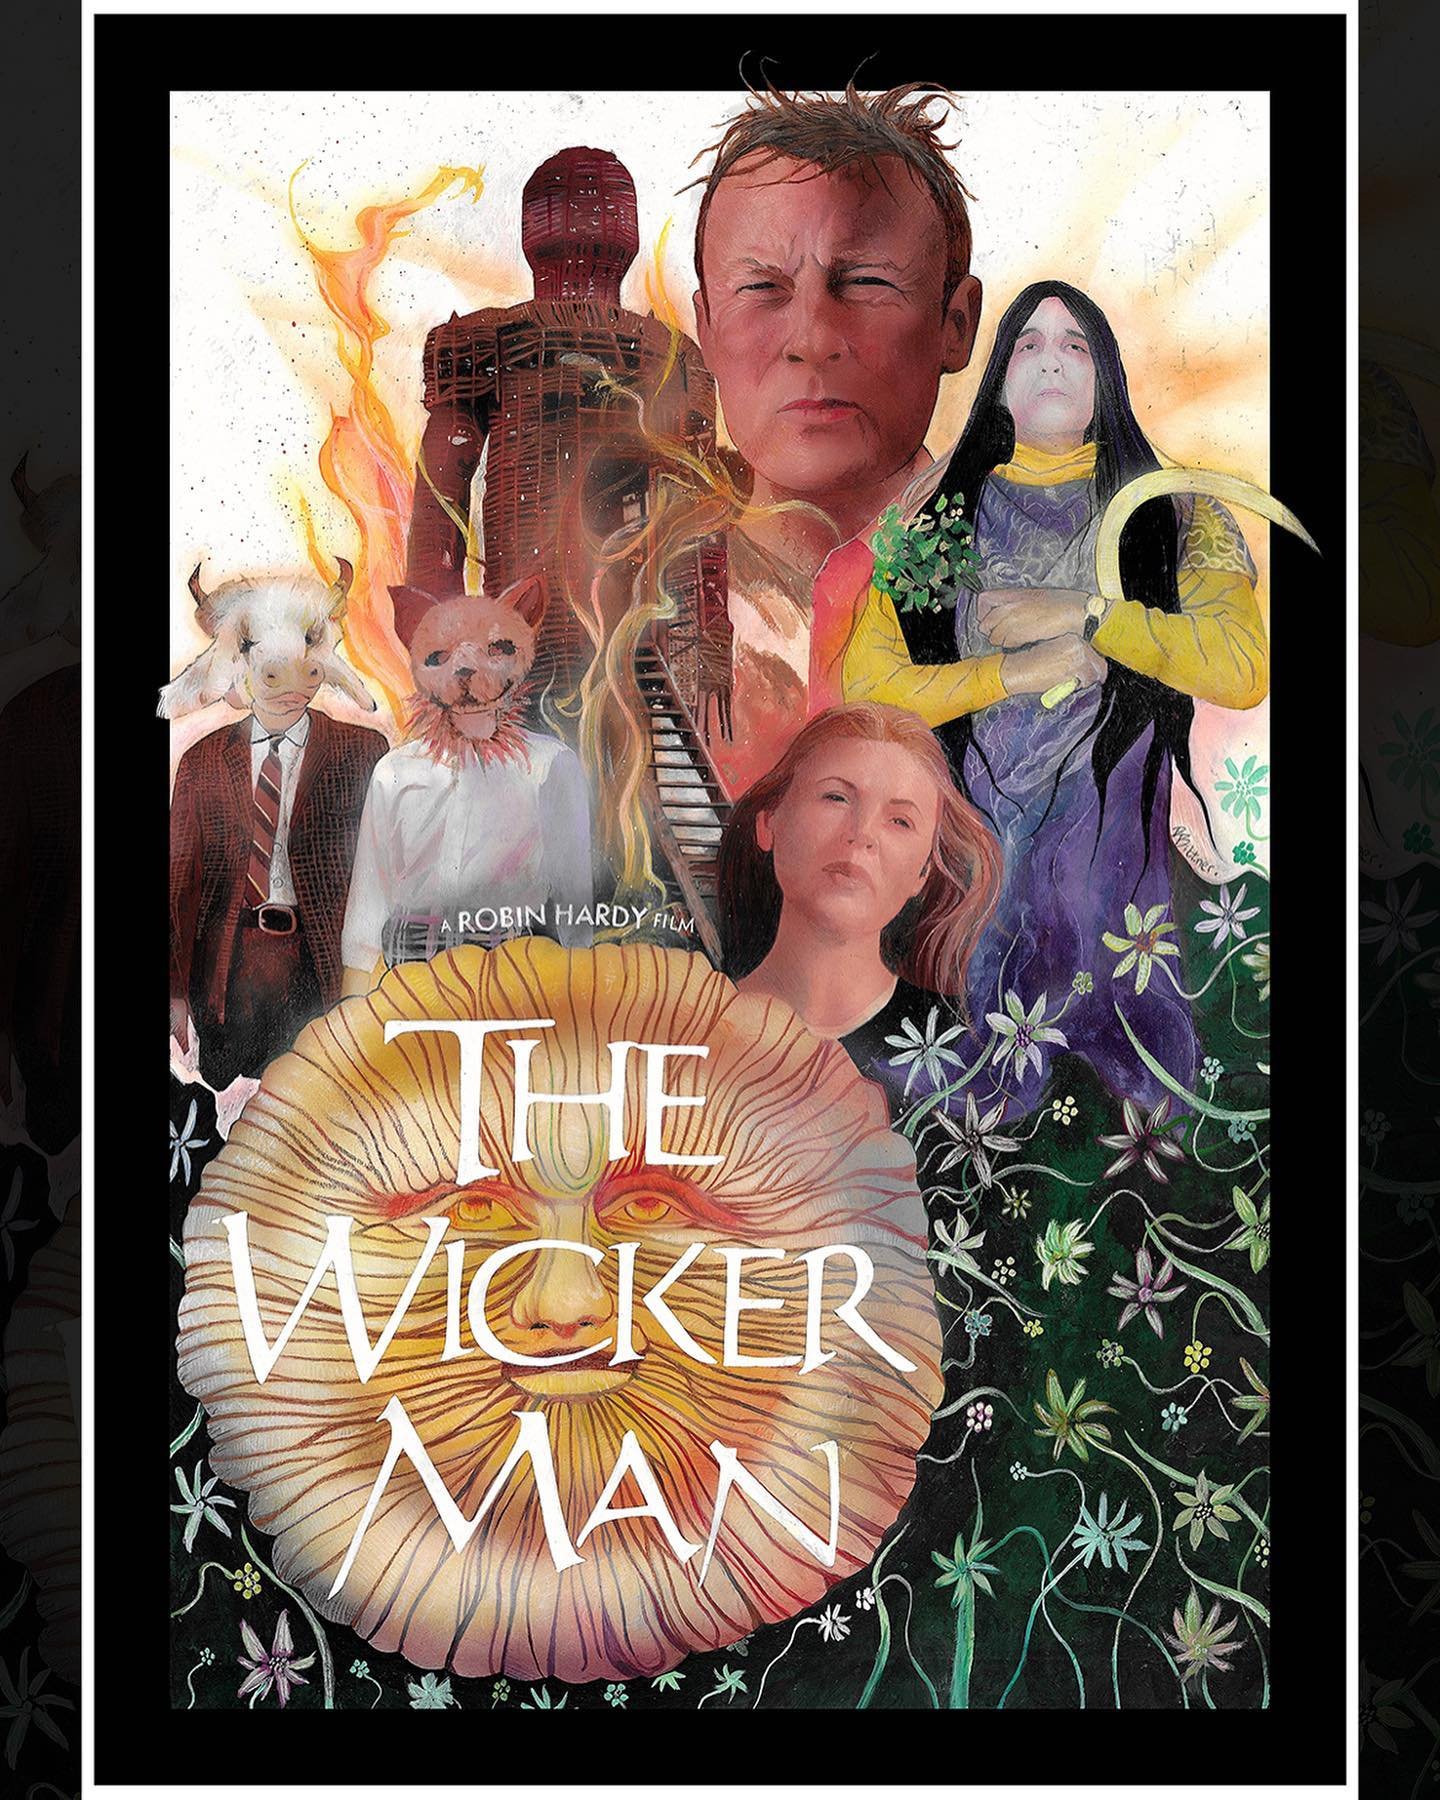 25 signed &amp; numbered prints are now available of my latest hand painted poster - The Wicker Man. Made using acrylic &amp; coloured pencils on paper. 

Link in bio, worldwide shipping. 

Never to be reprinted. 🌞🔥

#thewickerman #wickerman #horro